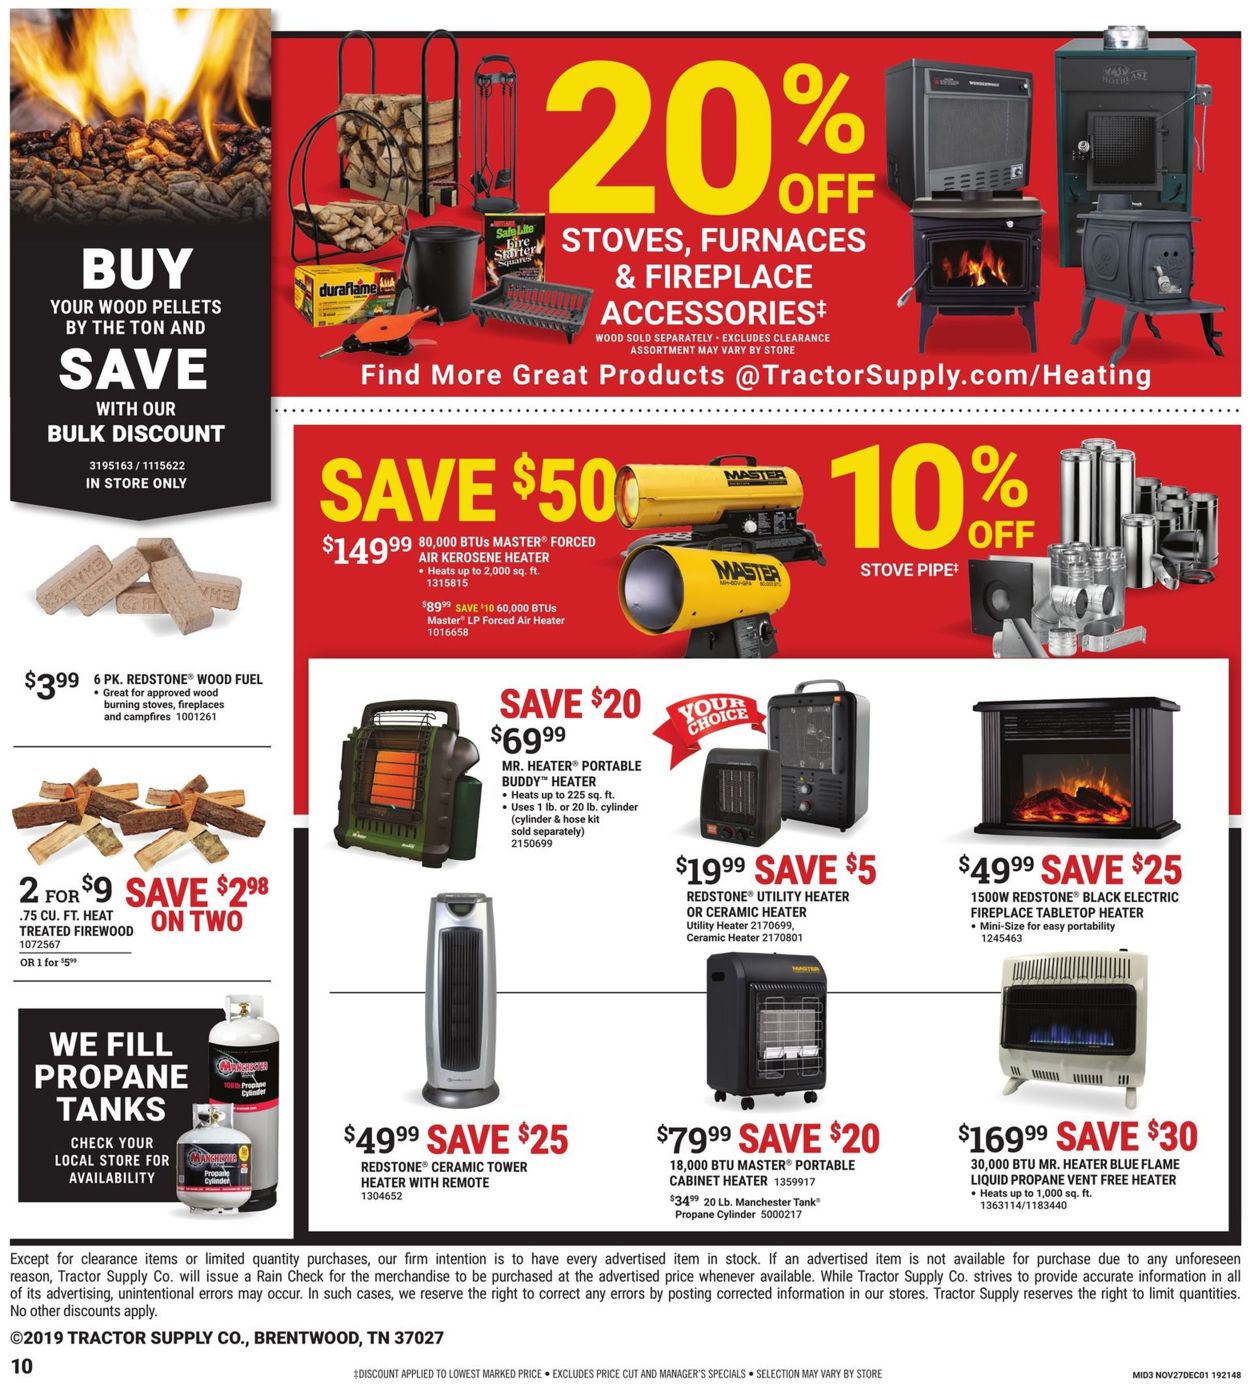 Tractor Supply - Black Friday Ad 2019 Current weekly ad 11/27 - 12/01/2019 [10] - 0